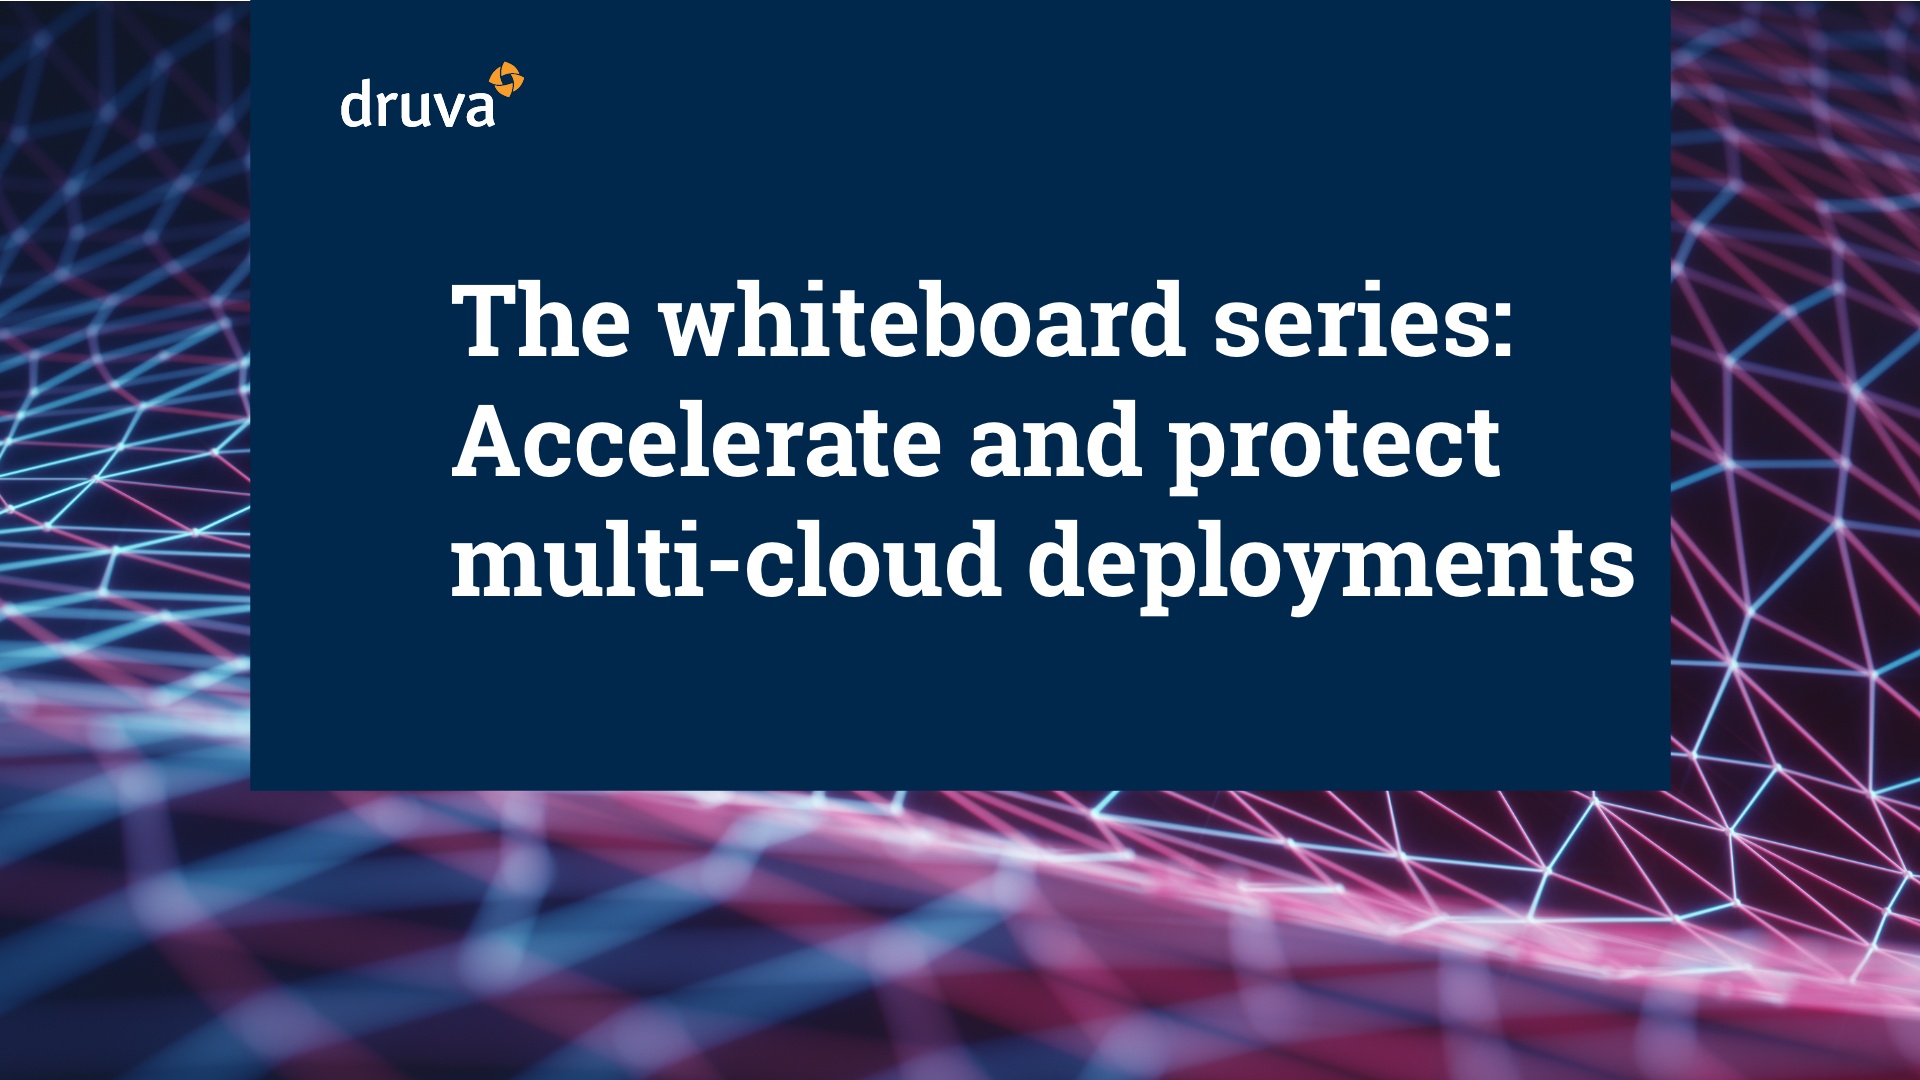 The whiteboard series - Accelerate and protect multi-cloud deployments